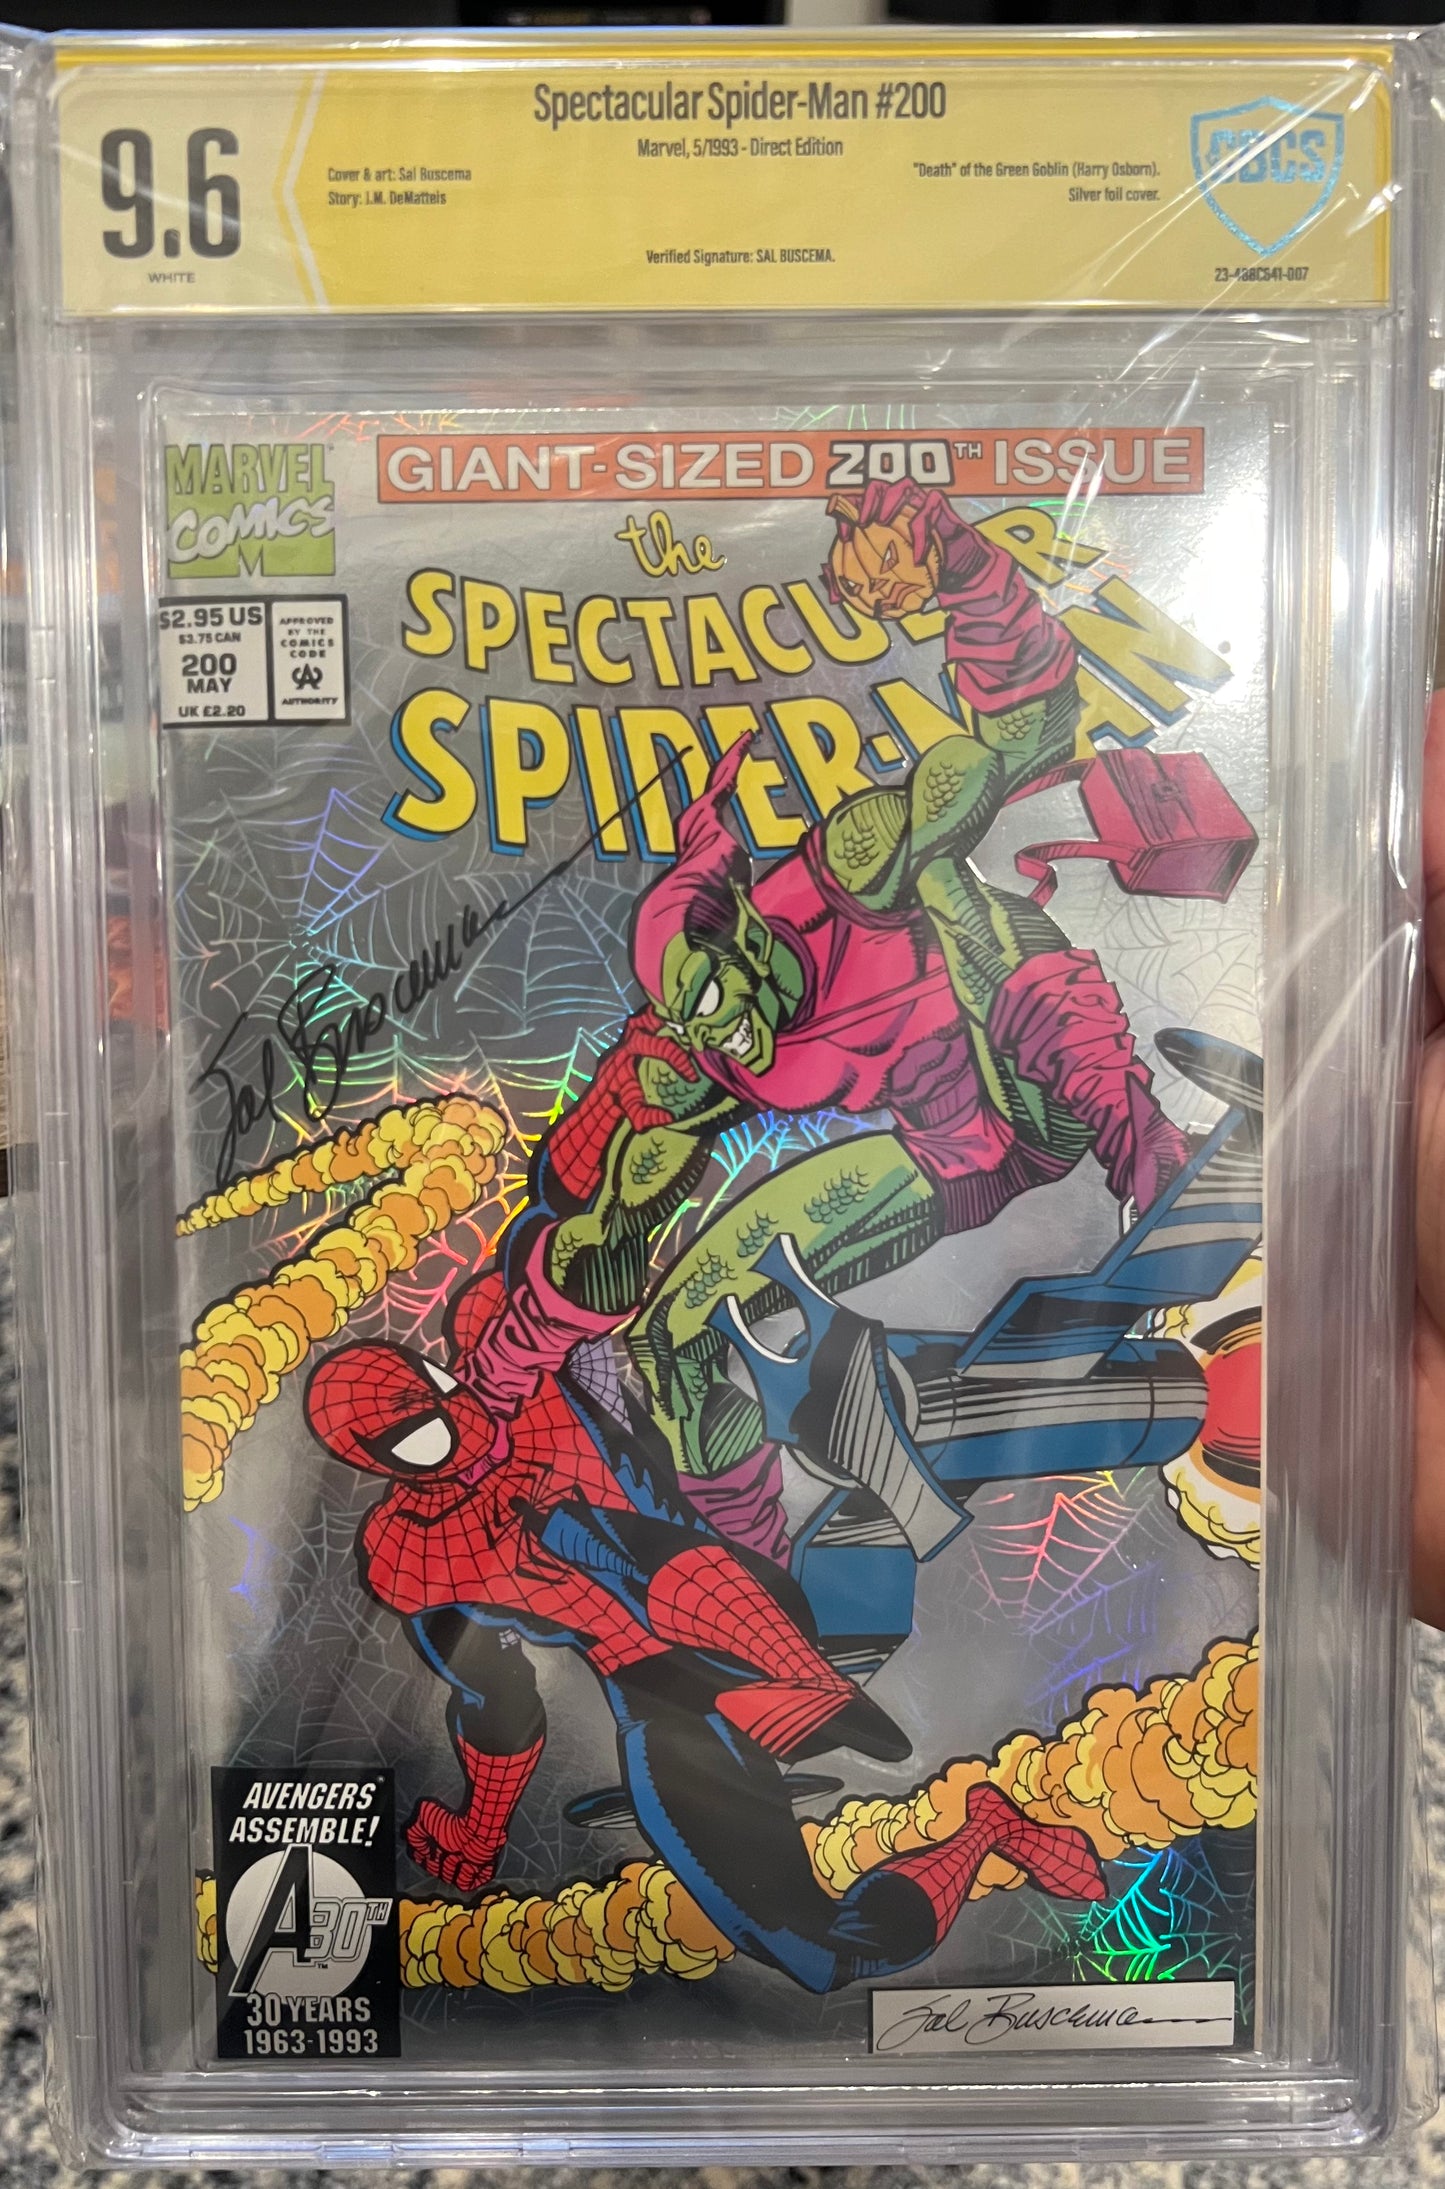 Spectacular Spider-Man CBCS 9.6 w/ Verified Signature from Sal Buscema (Marvel, 1st Series)